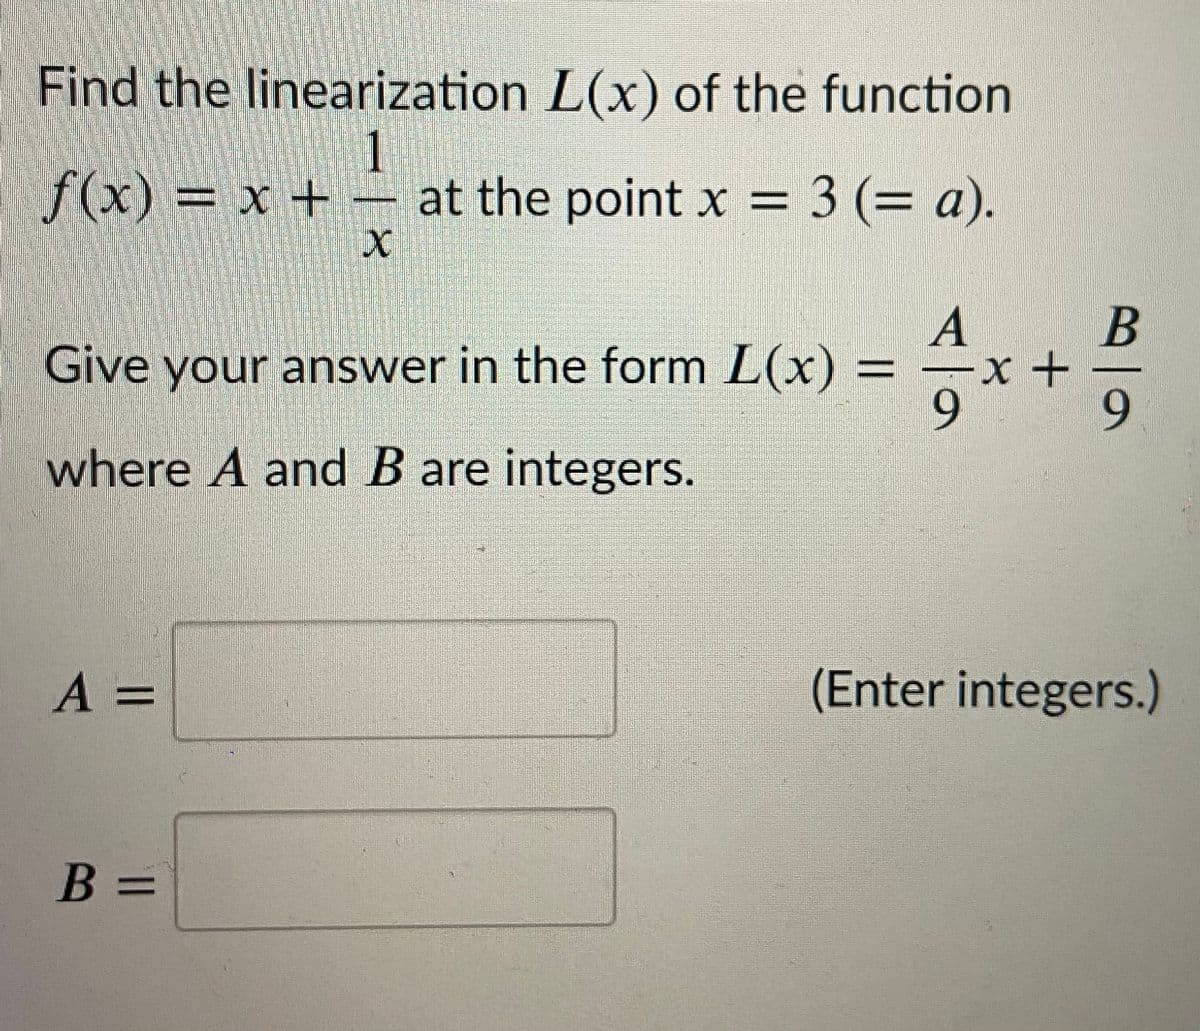 Find the linearization L(x) of the function
f(x) x +
at the point x = 3 (= a).
A
Give your answer in the form L(x) = =x+
9.
%3D
where A and B are integers.
A =
(Enter integers.)
%3D
